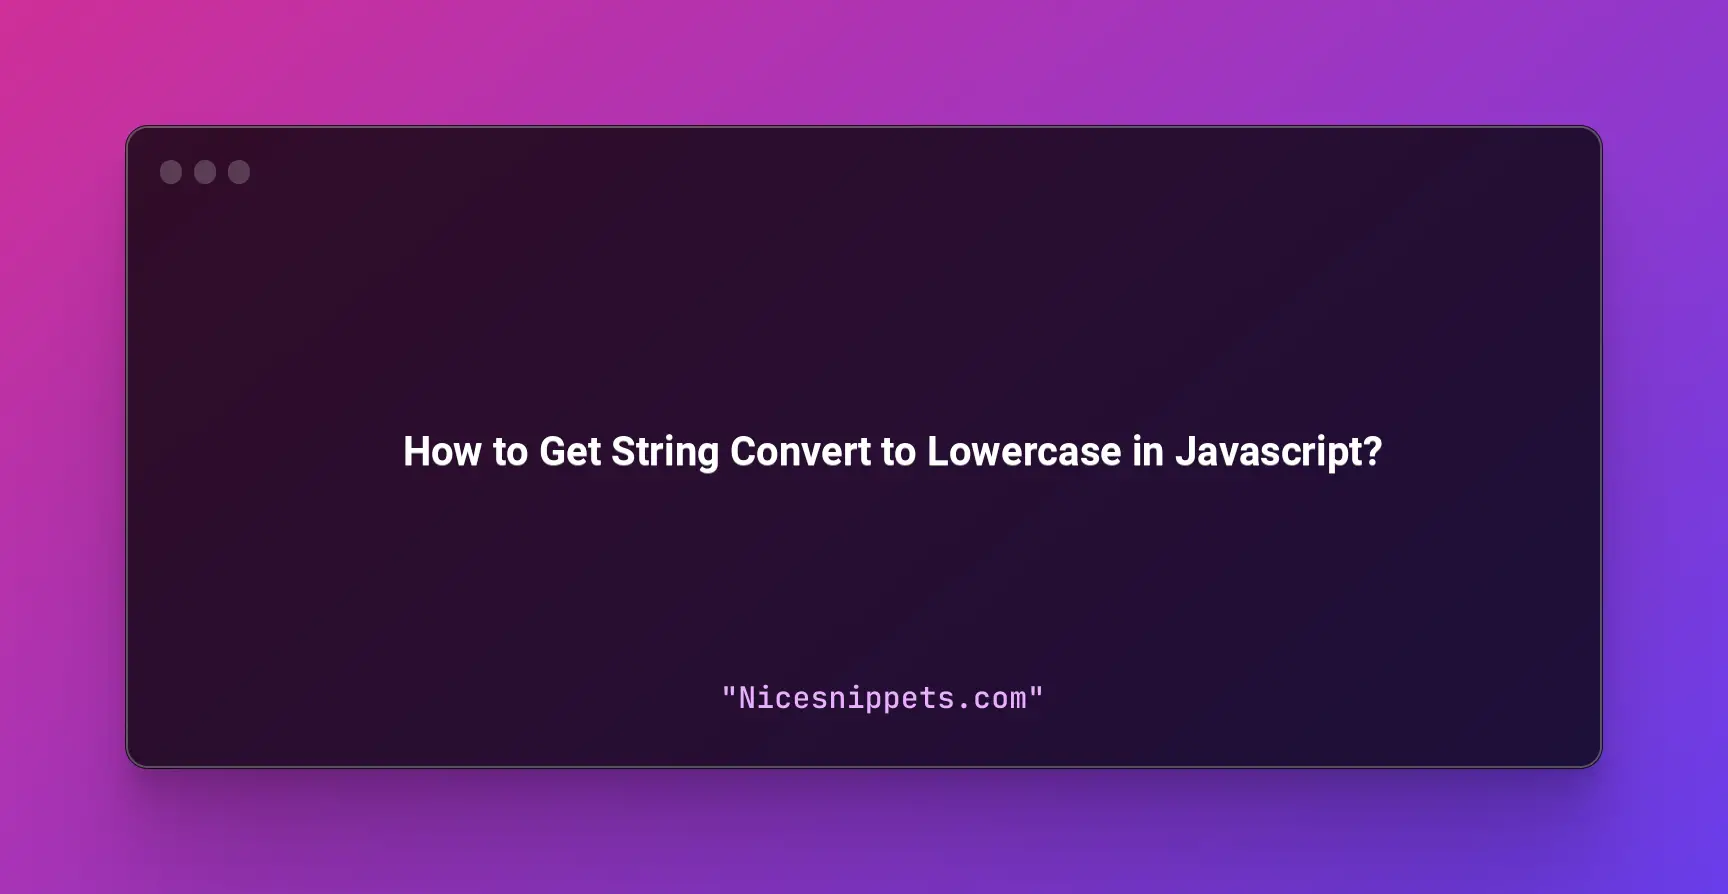 How to Get String Convert to Lowercase in Javascript?